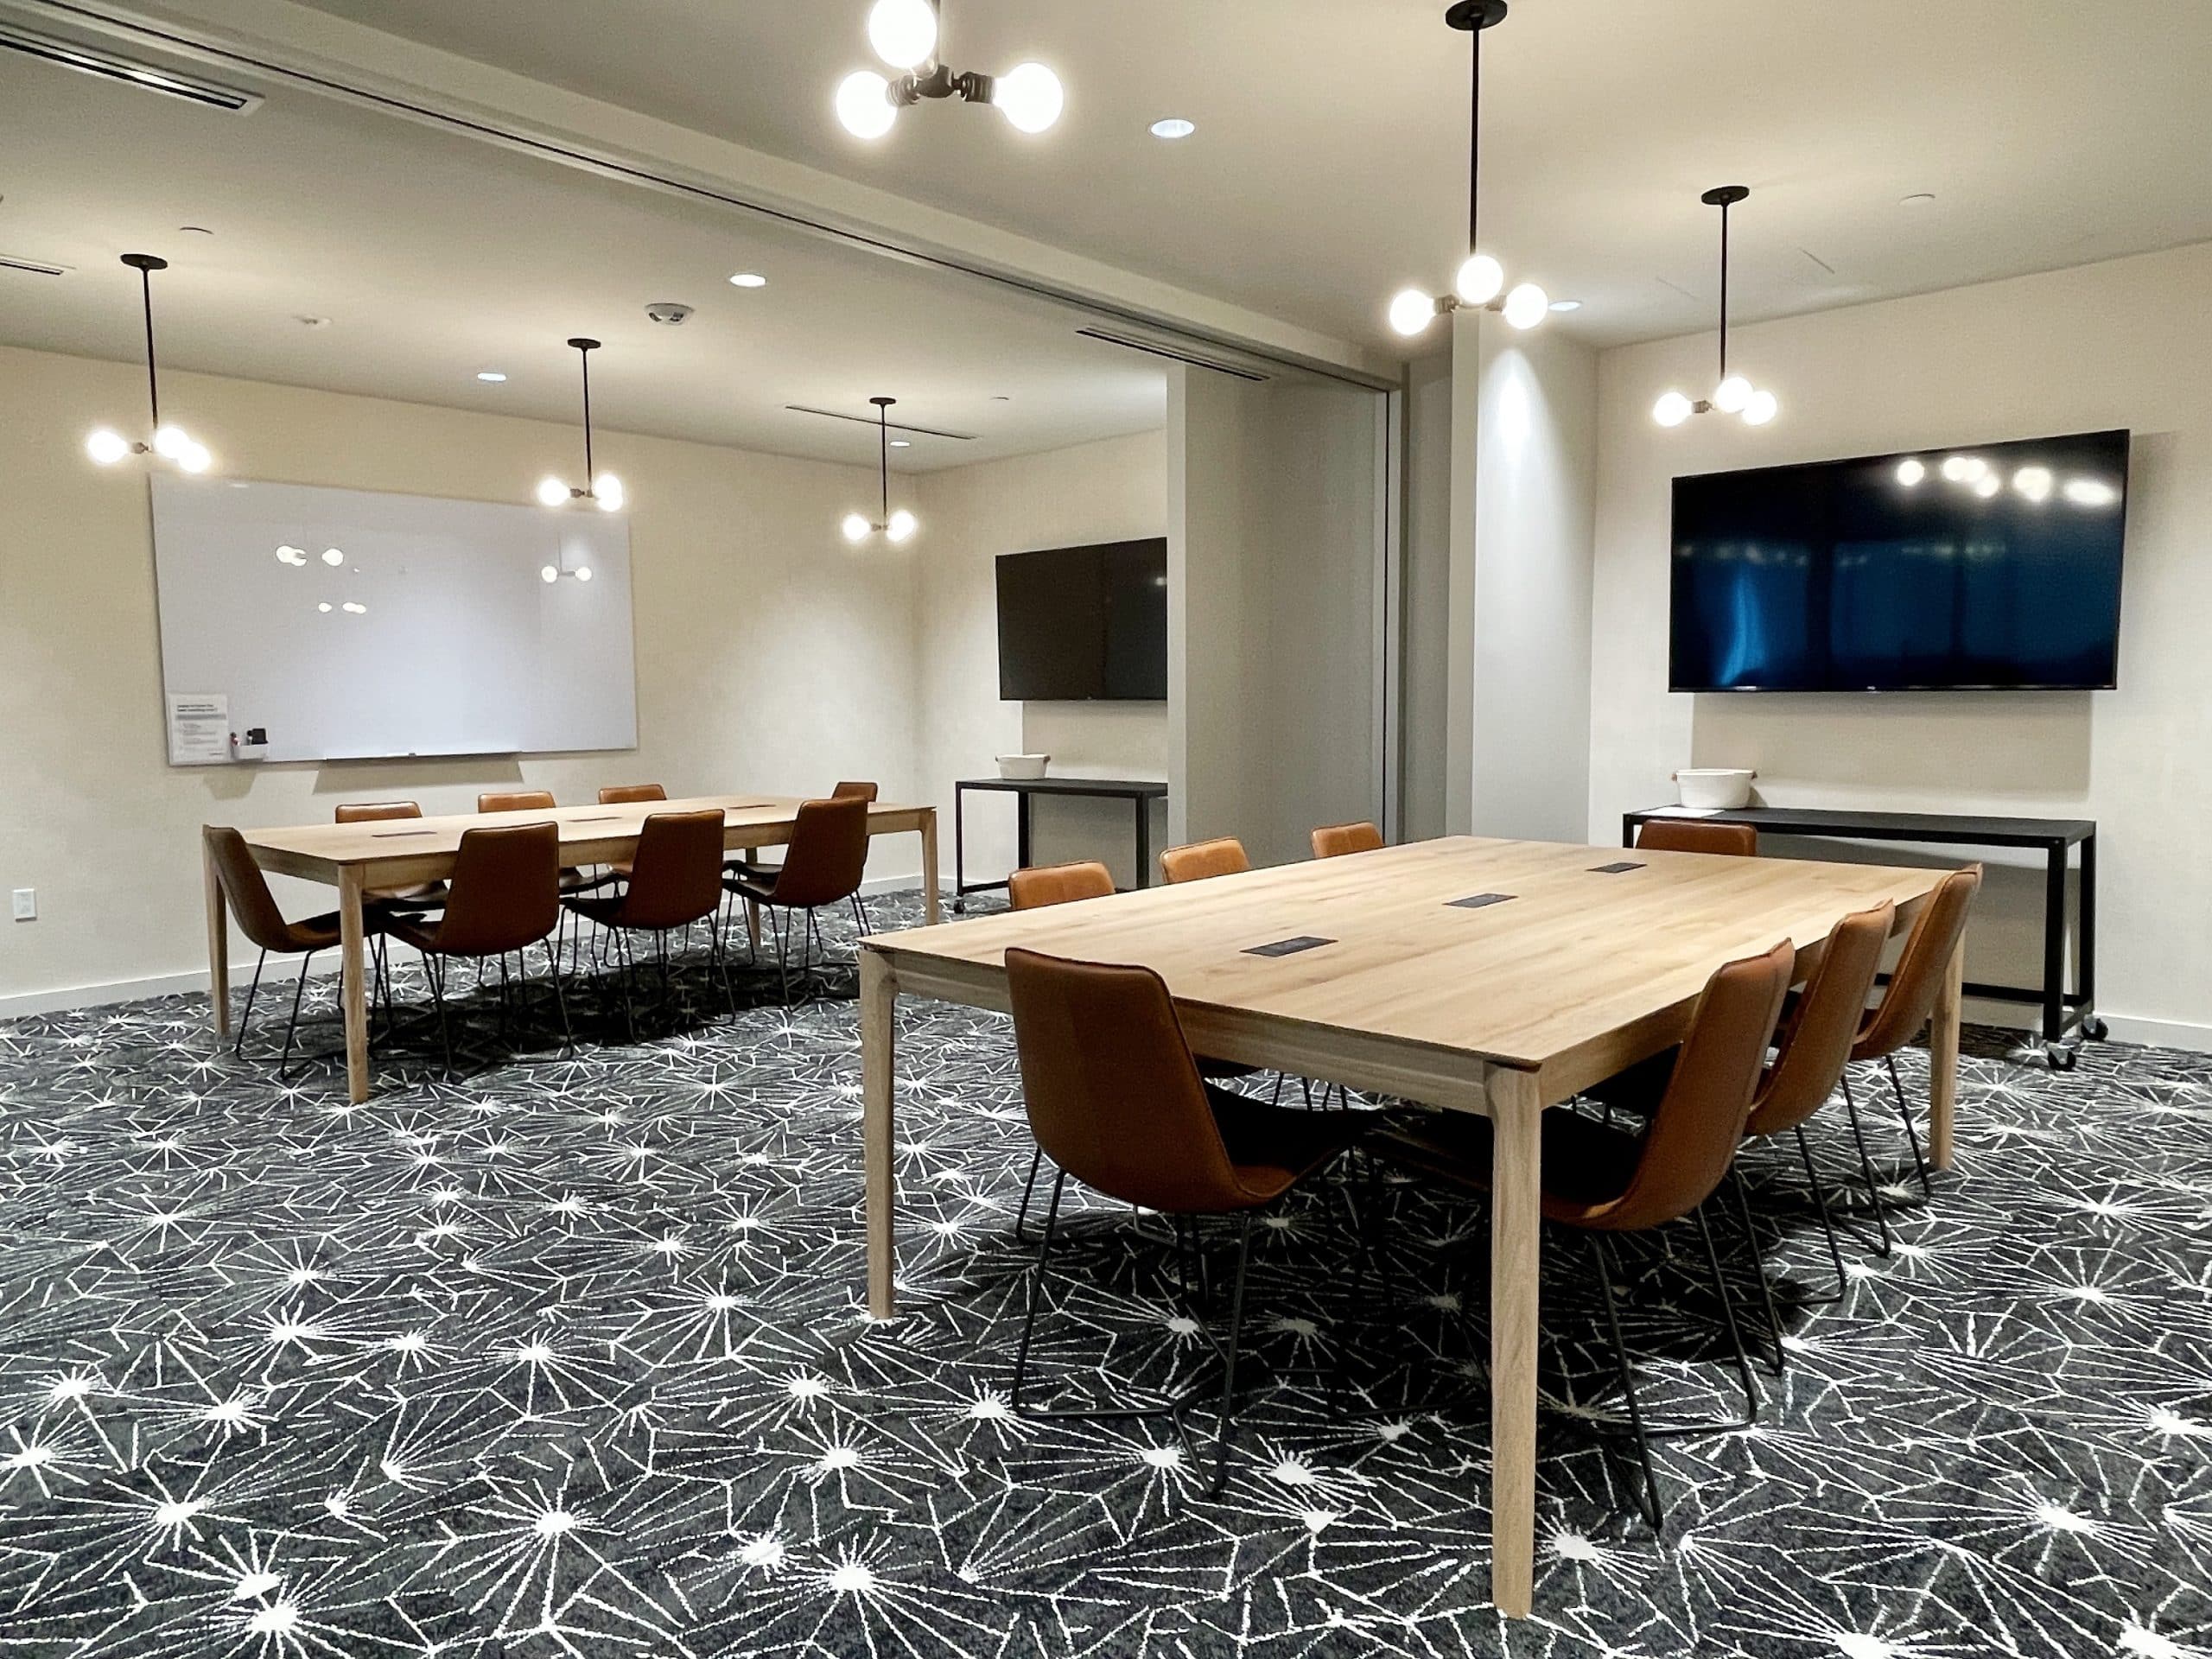 Combinable training room for large meetings